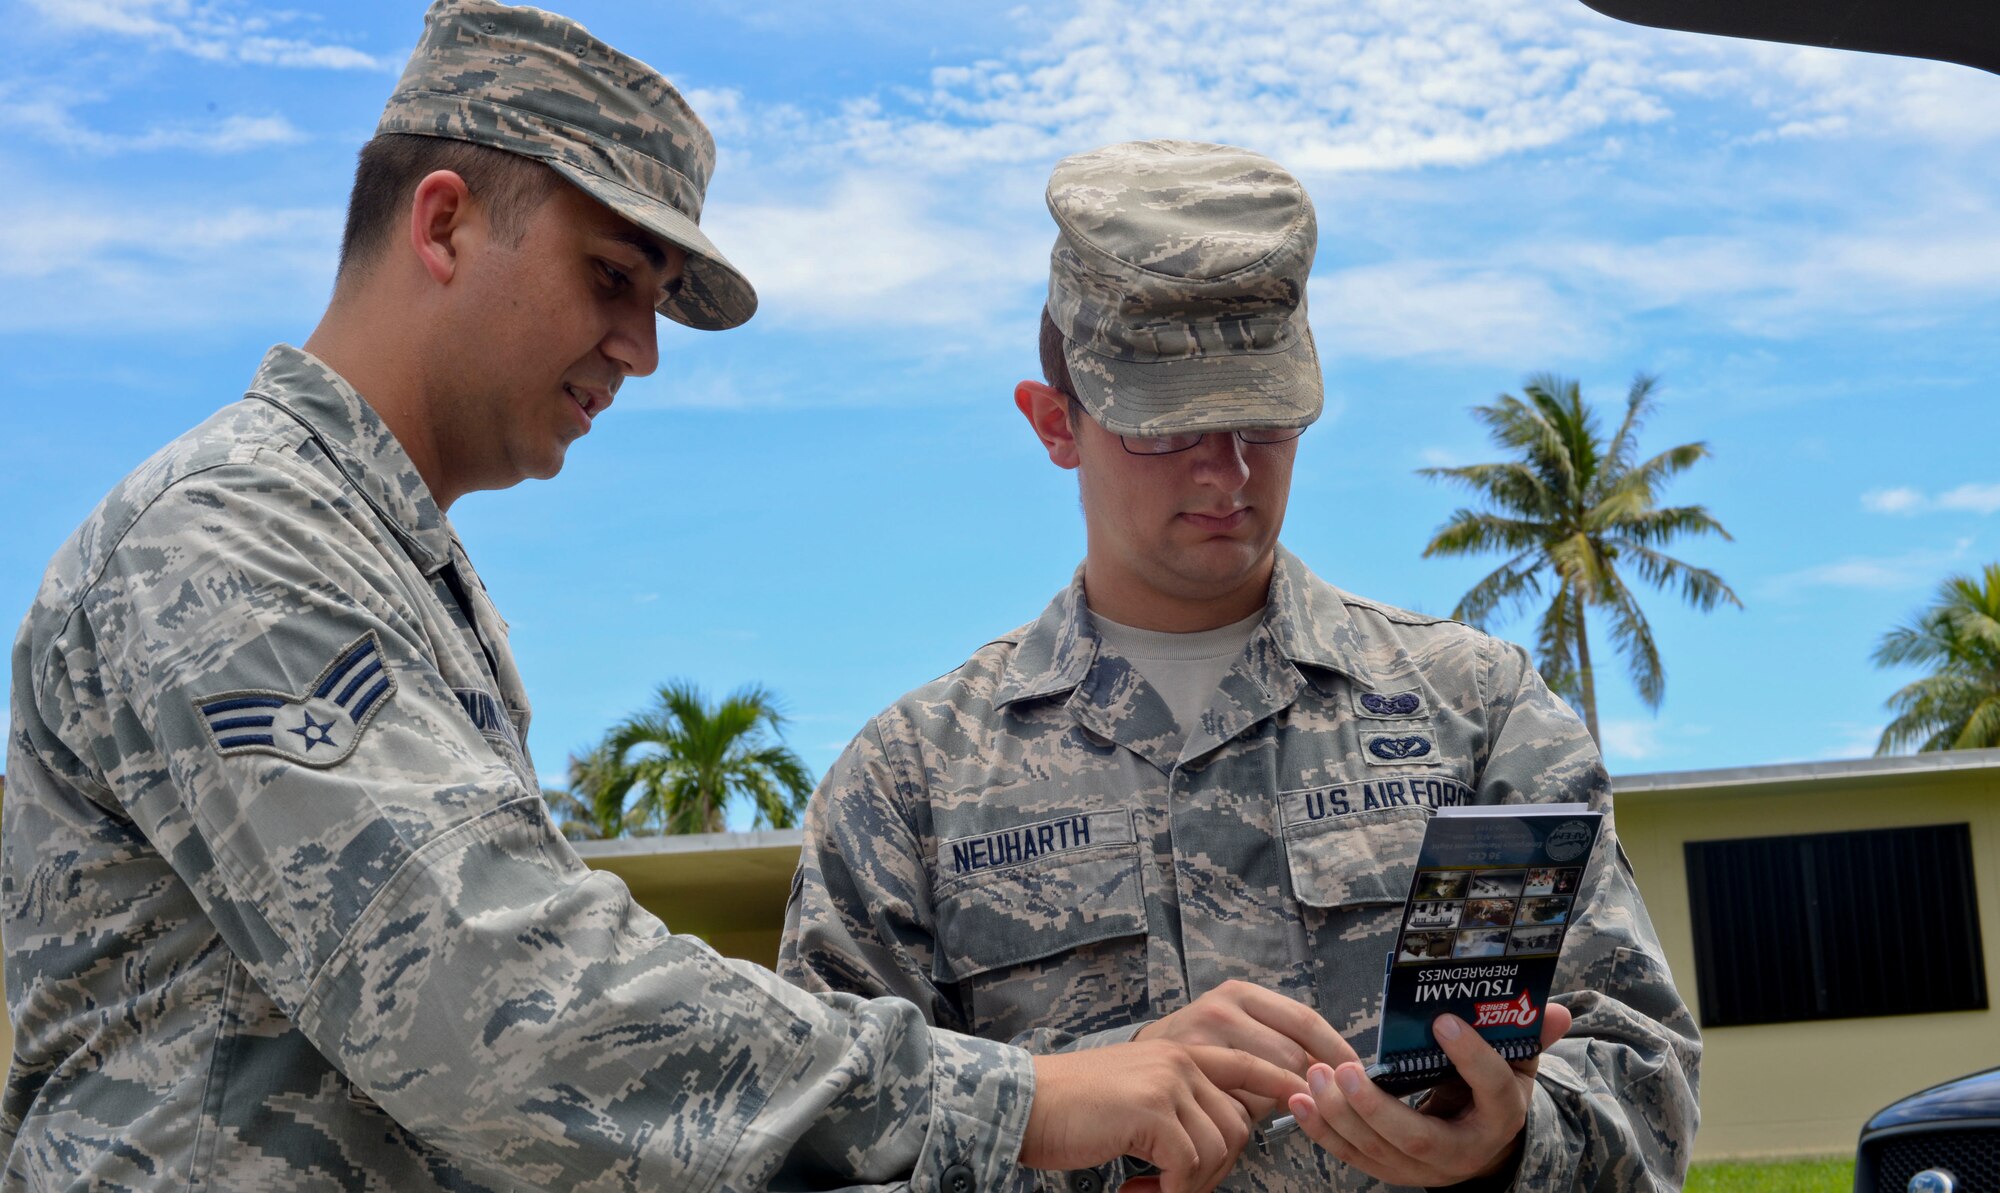 Senior Airman Louie Quintanilla and Airman 1st Class Taylor Neuharth, 36th Civil Engineering Emergency Management Flight, goes over information in a tsunami preparedness handbook Sept. 12, 2014, on Andersen Air Force Base, Guam. The Airmen went through base housing passing out information about natural disasters for National Preparedness Month. (U.S. Air Force photo by Staff Sgt. Robert Hicks/Released)